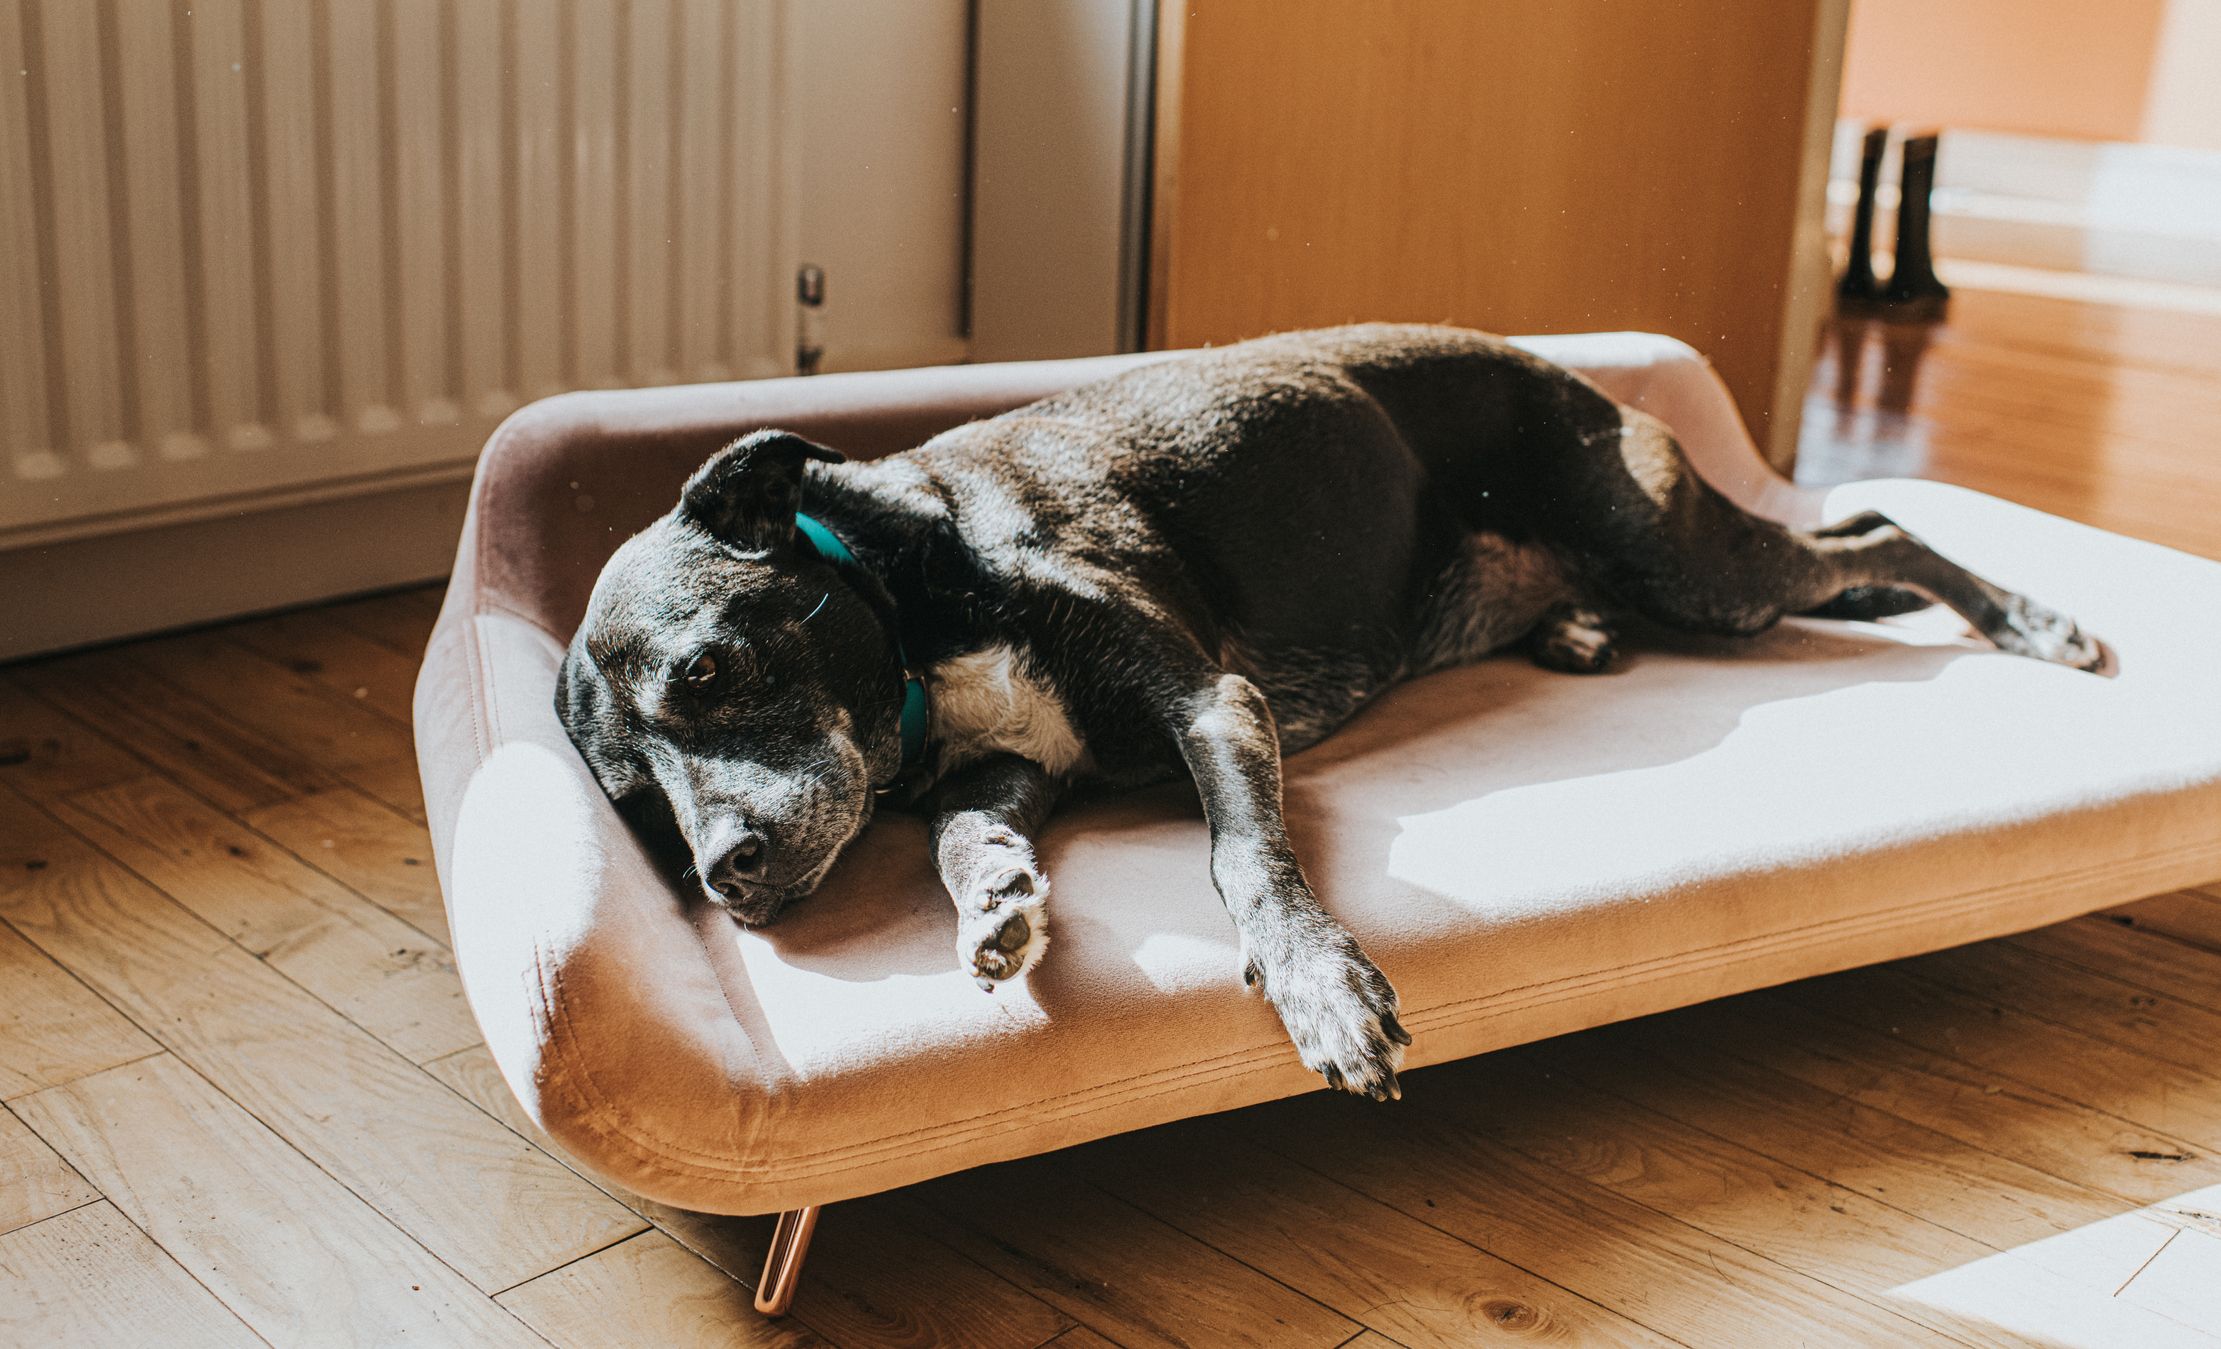 8 Best Cooling Dog Beds of 2023 - Cool Dog Beds and Mats